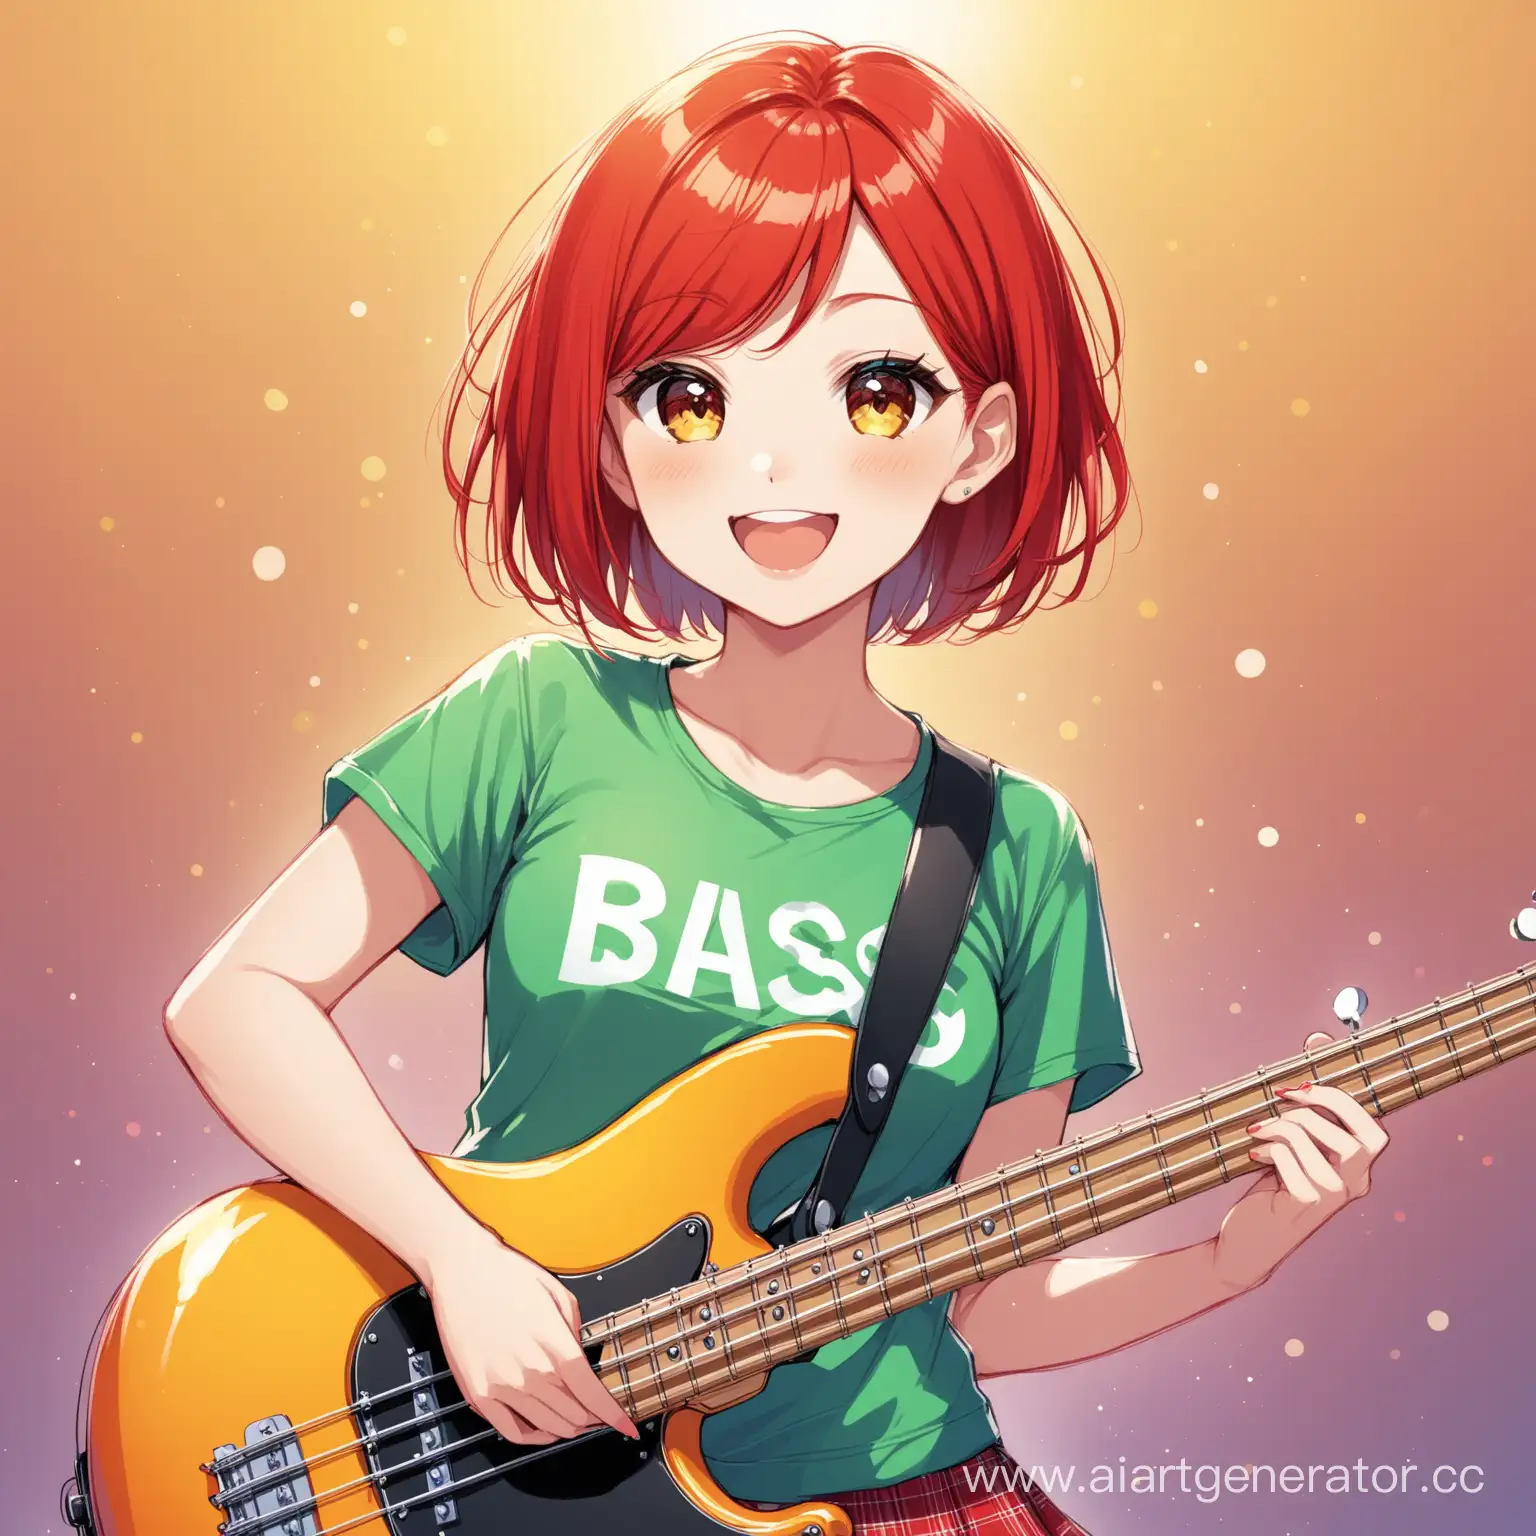 Cheerful-Bass-Guitarist-RedHaired-Girl-with-Vibrant-Style